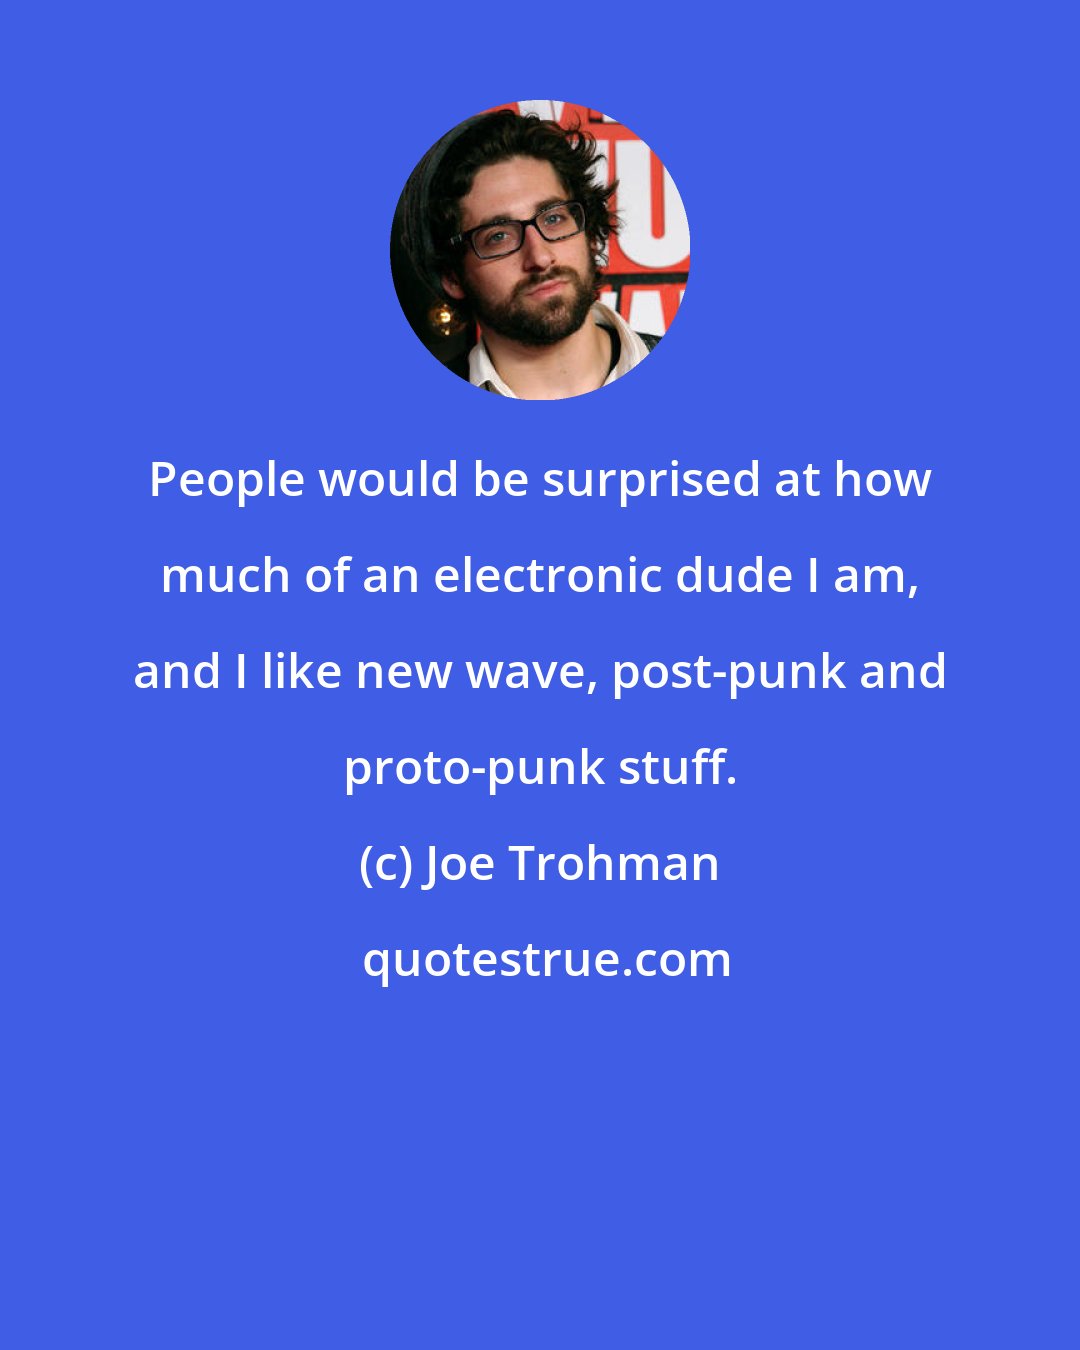 Joe Trohman: People would be surprised at how much of an electronic dude I am, and I like new wave, post-punk and proto-punk stuff.